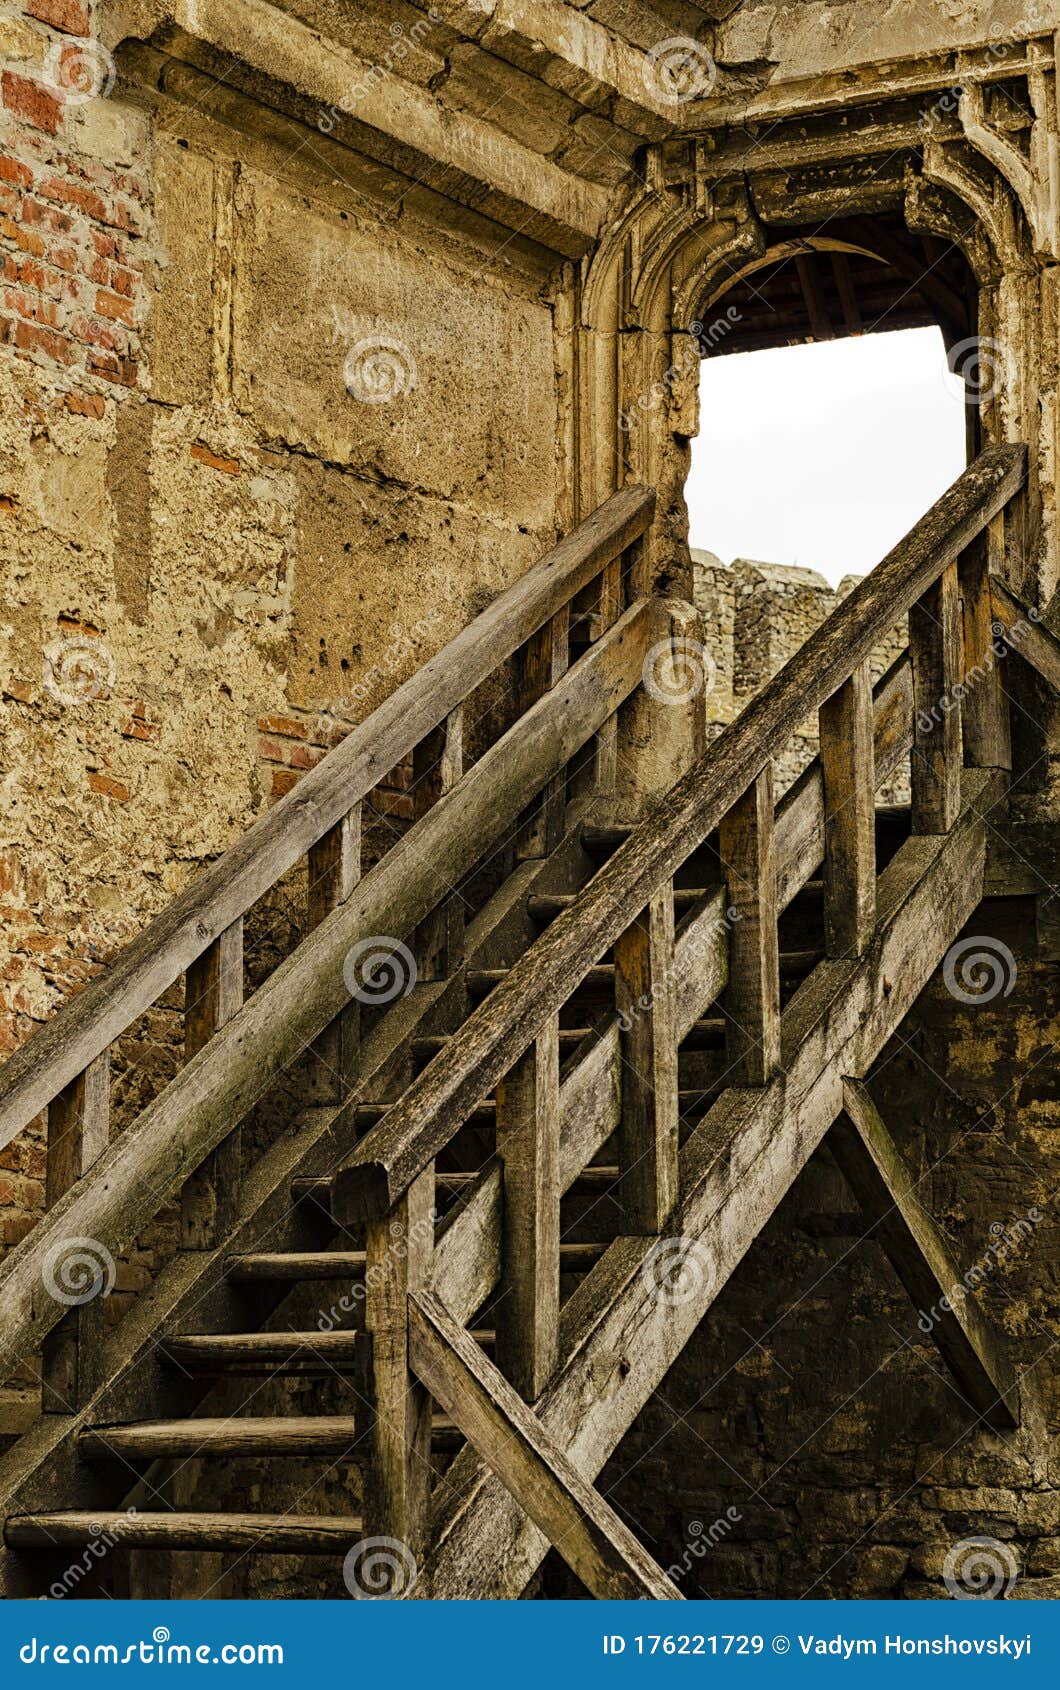 Wooden Staircase of an Old Castle, Handmade Stock Image - Image of